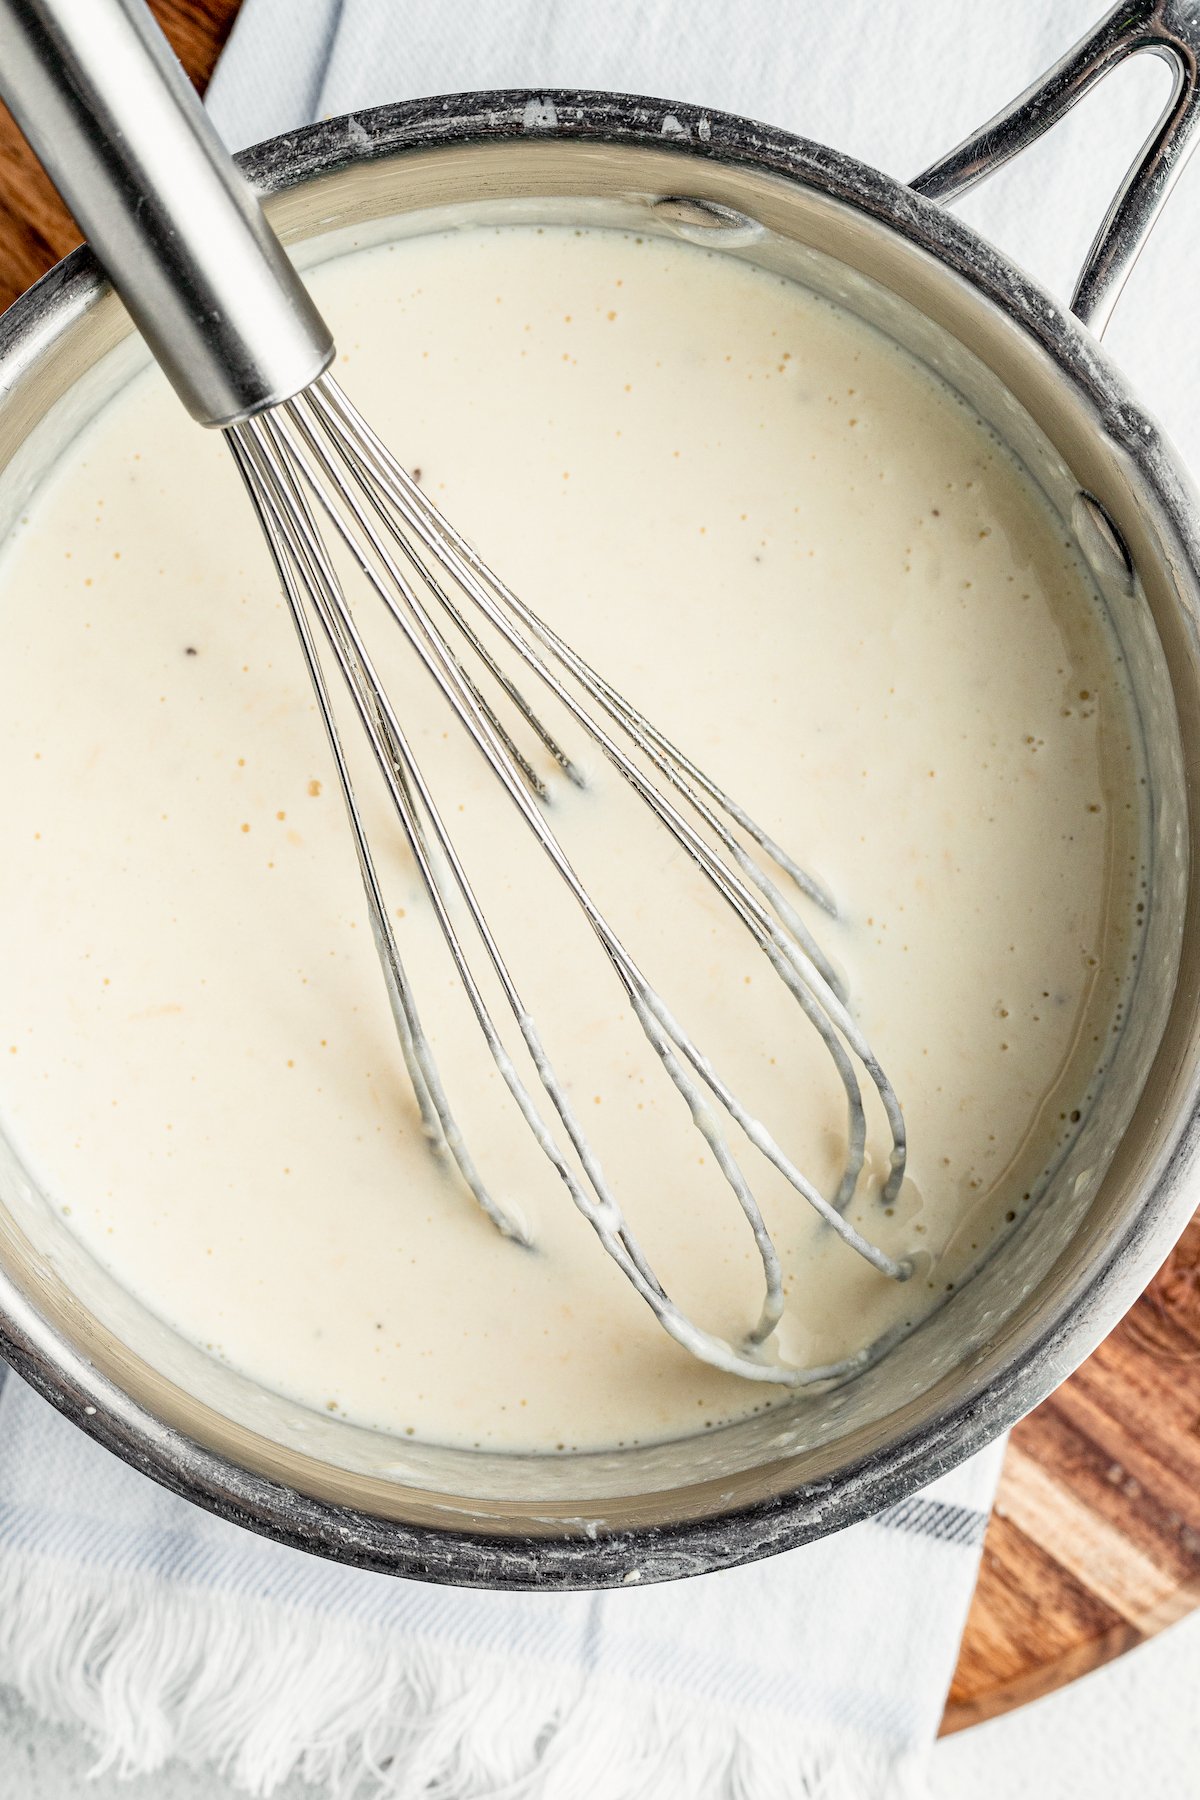 A creamy sauce being whisked in a saucepan.